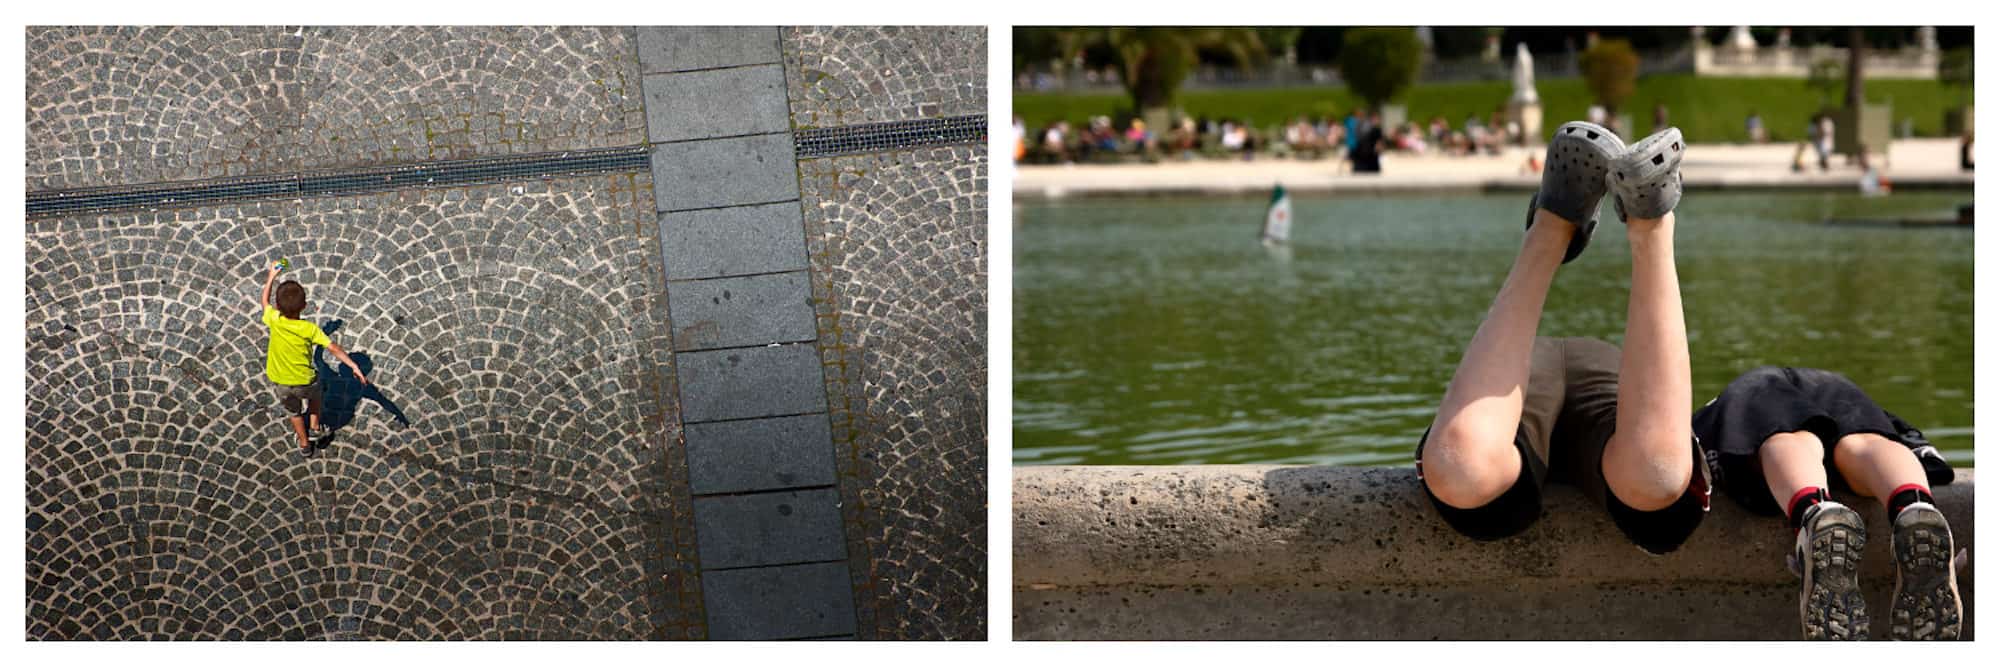 An aerial view of kid in a yellow t-shirt, walking across a cobblestone square in summer in Paris (left). Two pairs of children's legs as they lean into the pond at the Jardin des Tuileries, a popular kid-friendly spot in Paris (right).